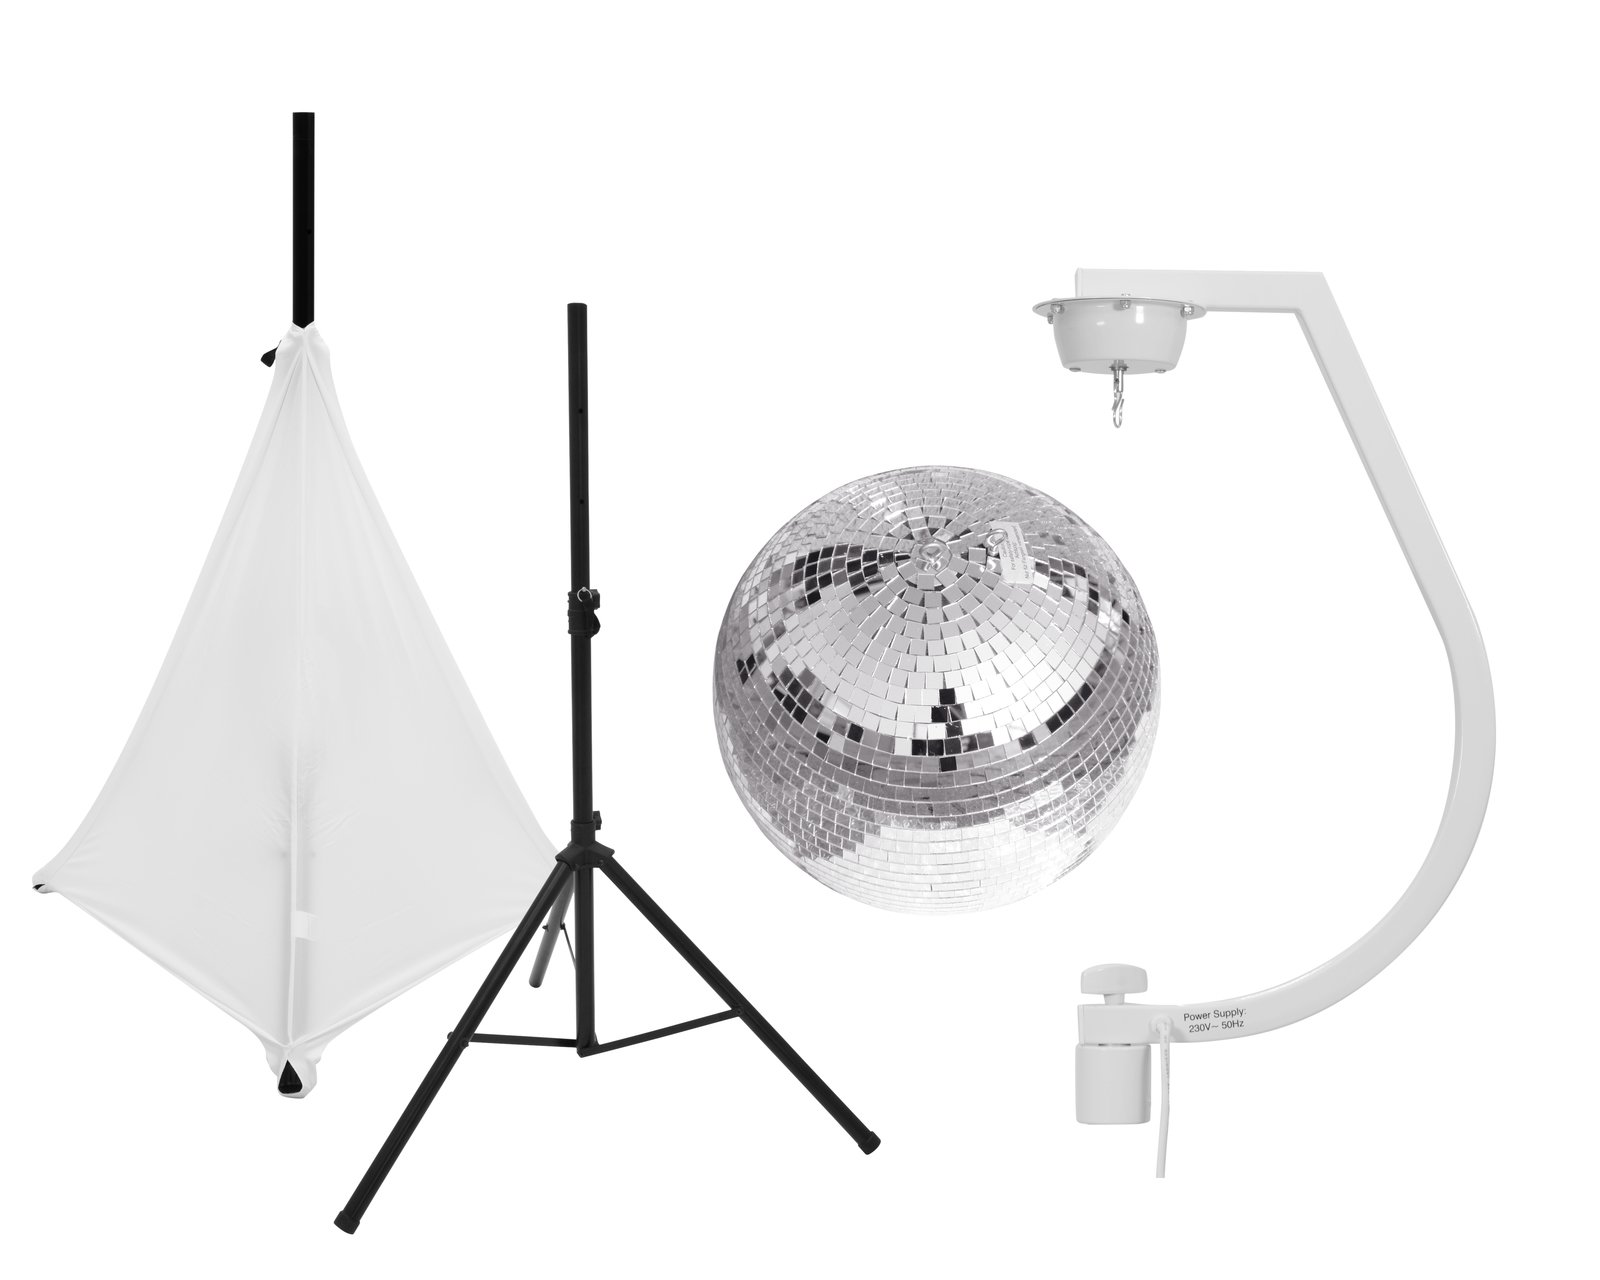 EUROLITE Set Mirror ball 30cm with stand and tripod cover white